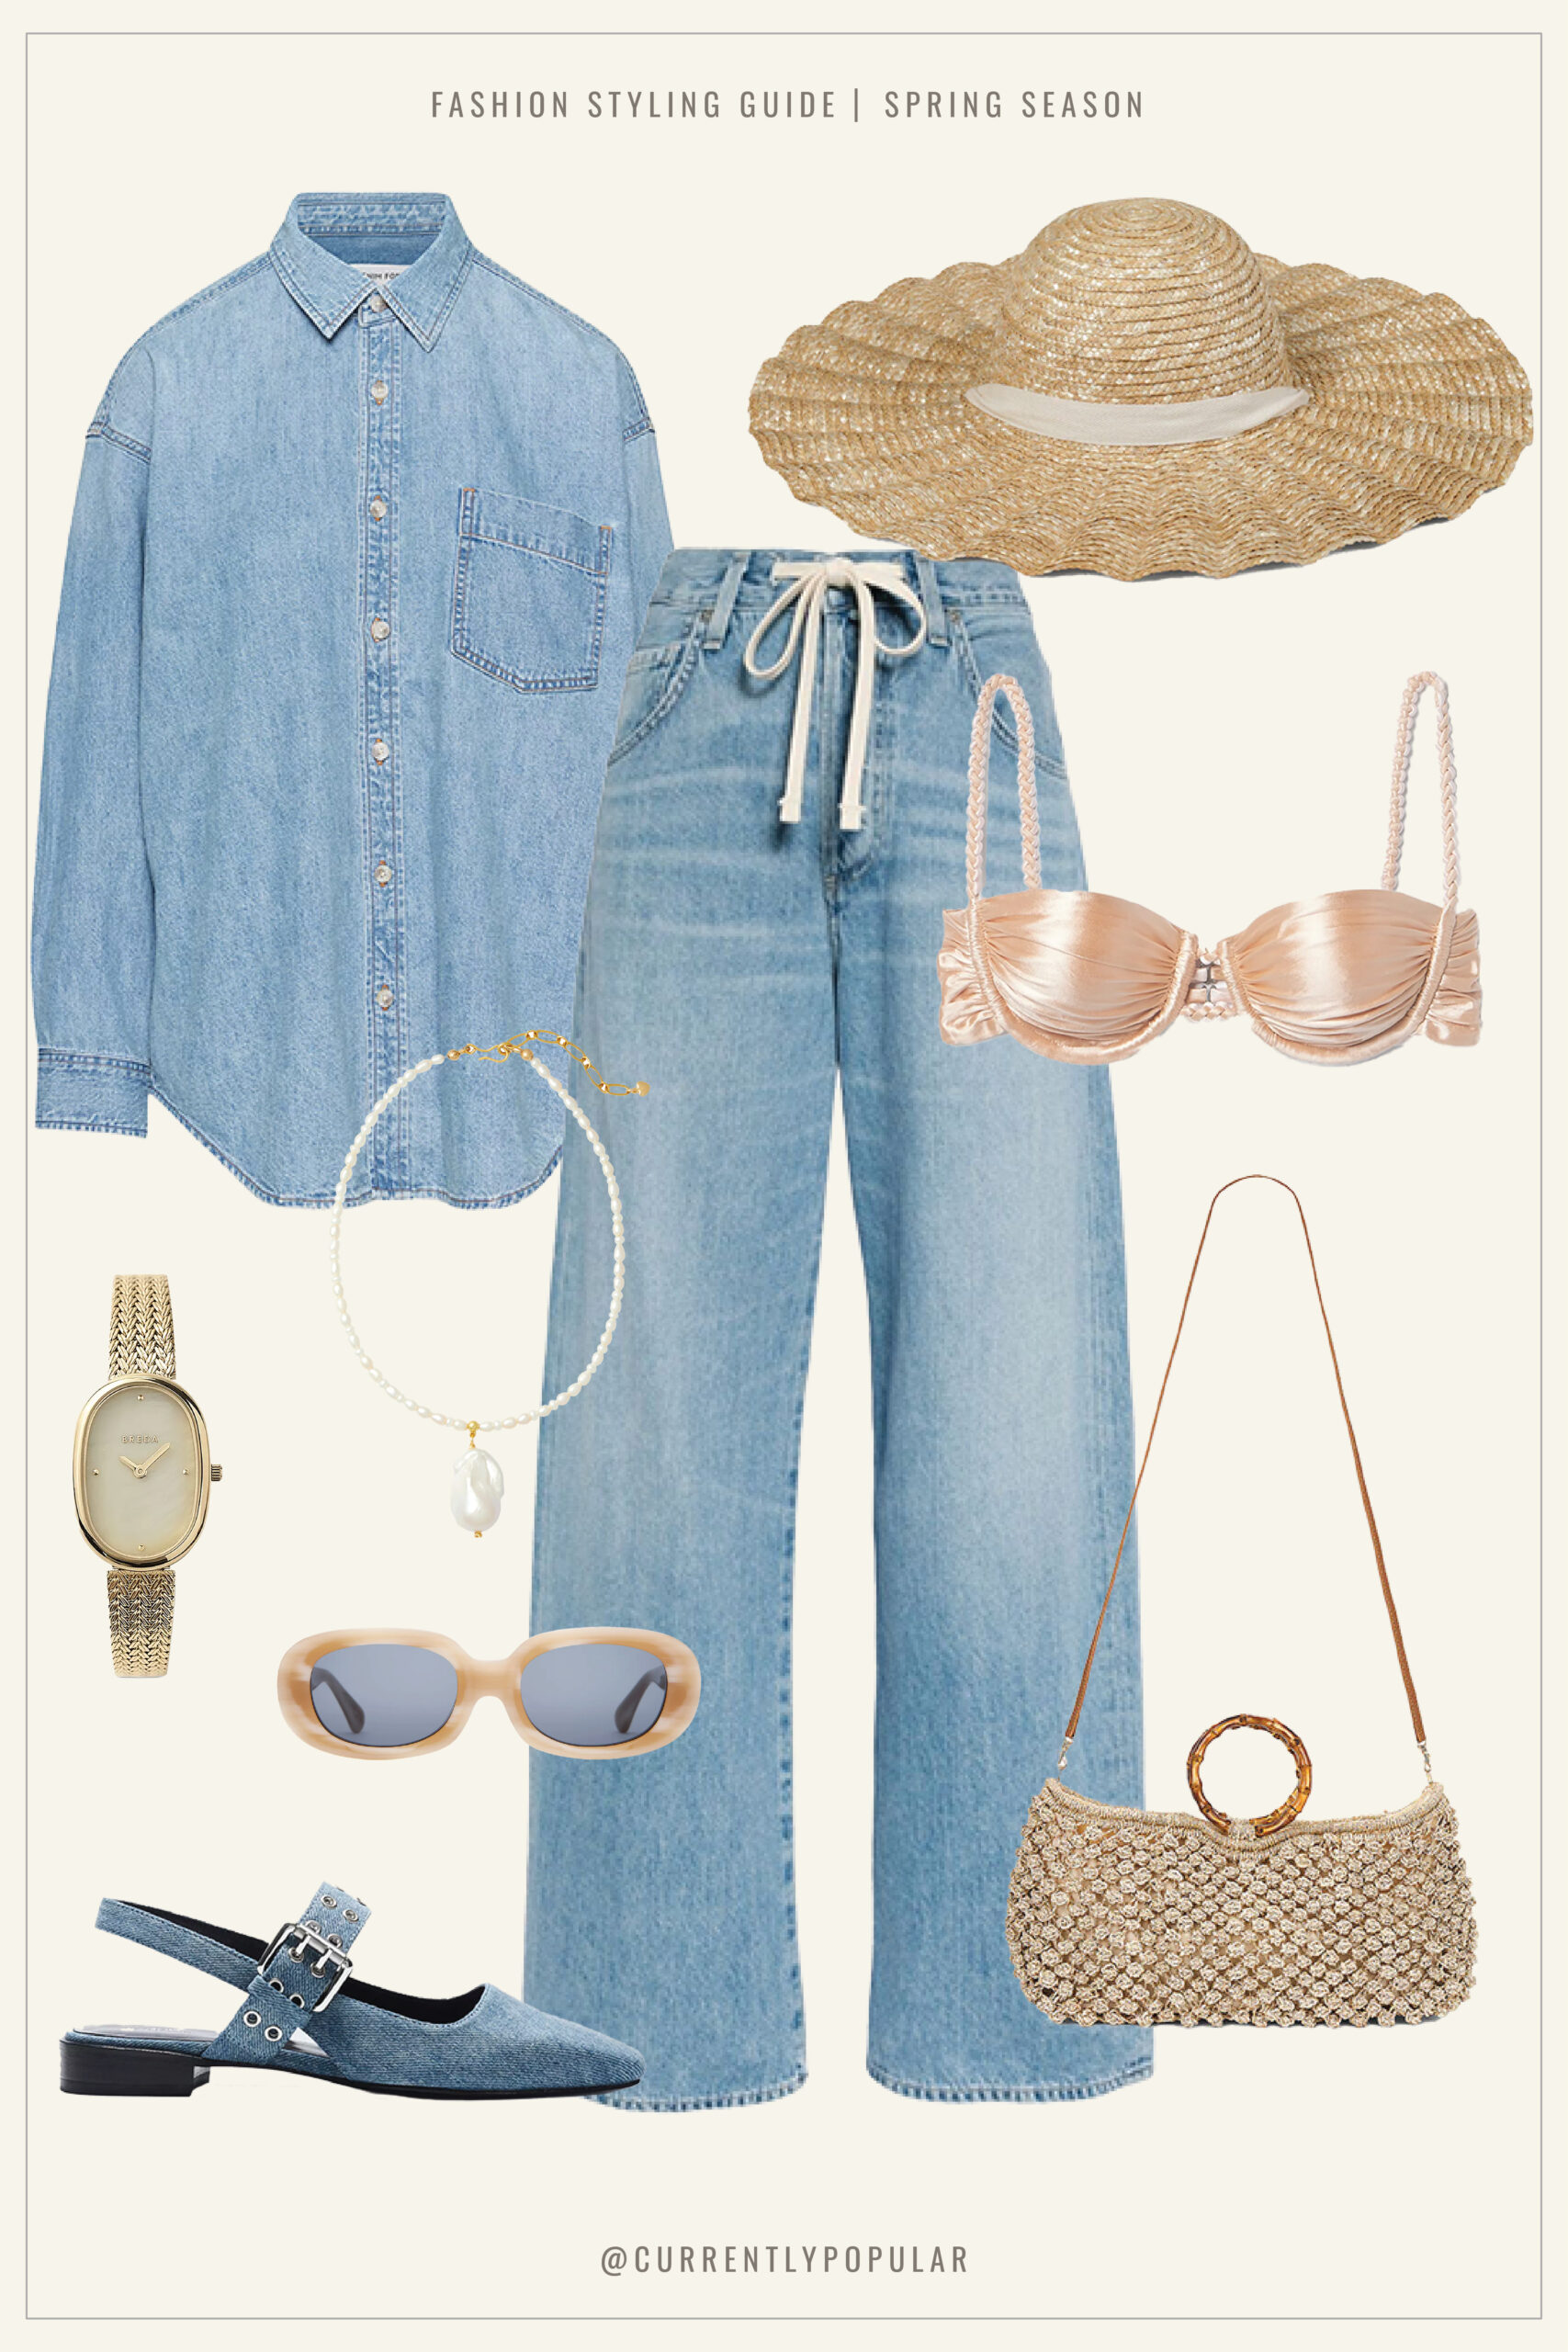 An outfit featuring a casual spring look with light-wash denim shirt and pants, complemented by a rose-tinted bikini top, a straw sun hat, and accessories including a watch, pearl necklace, and cat-eye sunglasses. The ensemble is completed with denim flats and a crochet bag with a unique handle. Ideal for a relaxed yet chic seaside vibe.